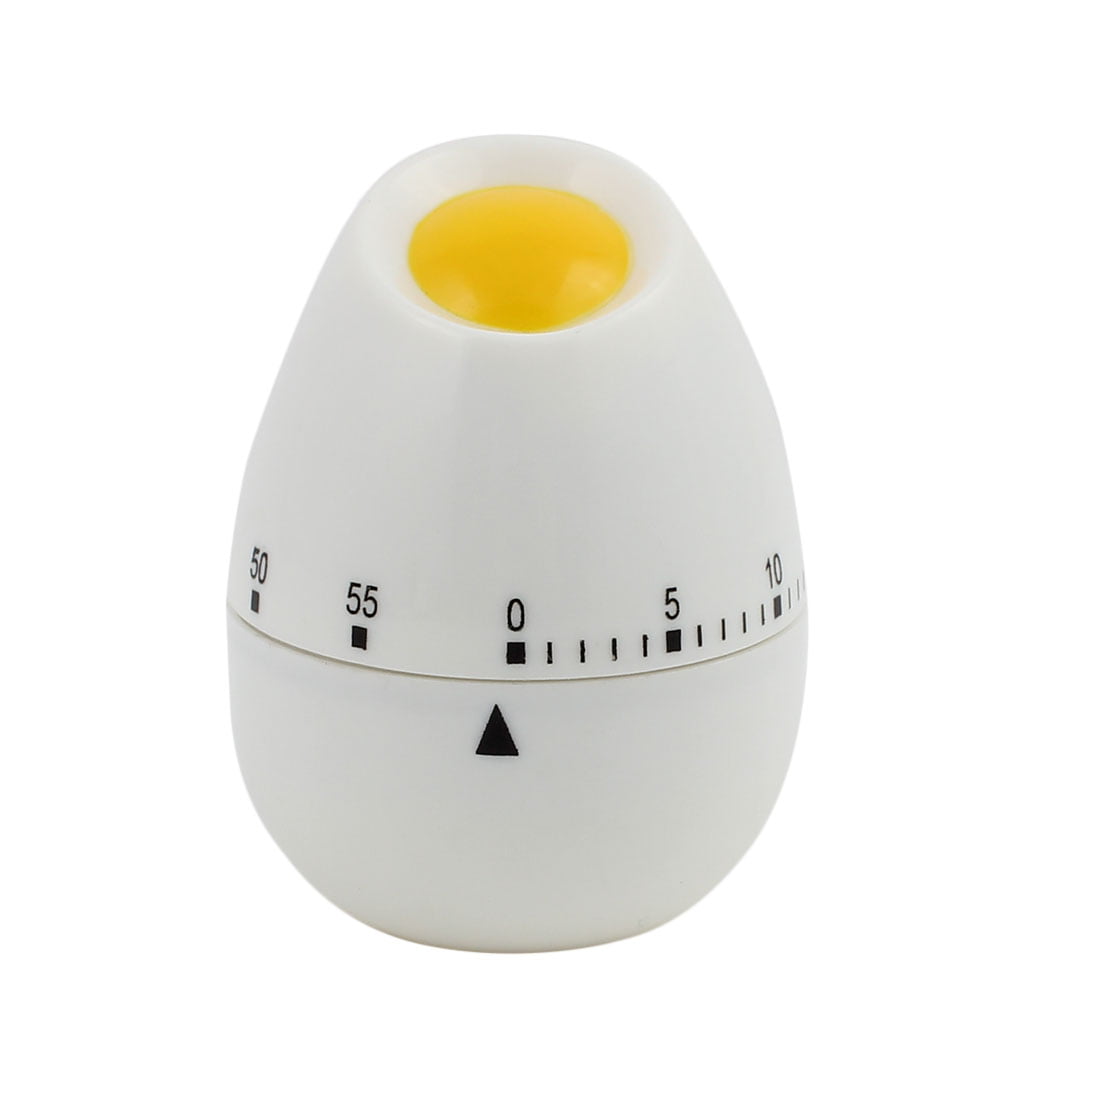 2.2x2.2x3-Inch 60 Minutes Mechanical Kitchen Salted Egg Timer1100 x 1100